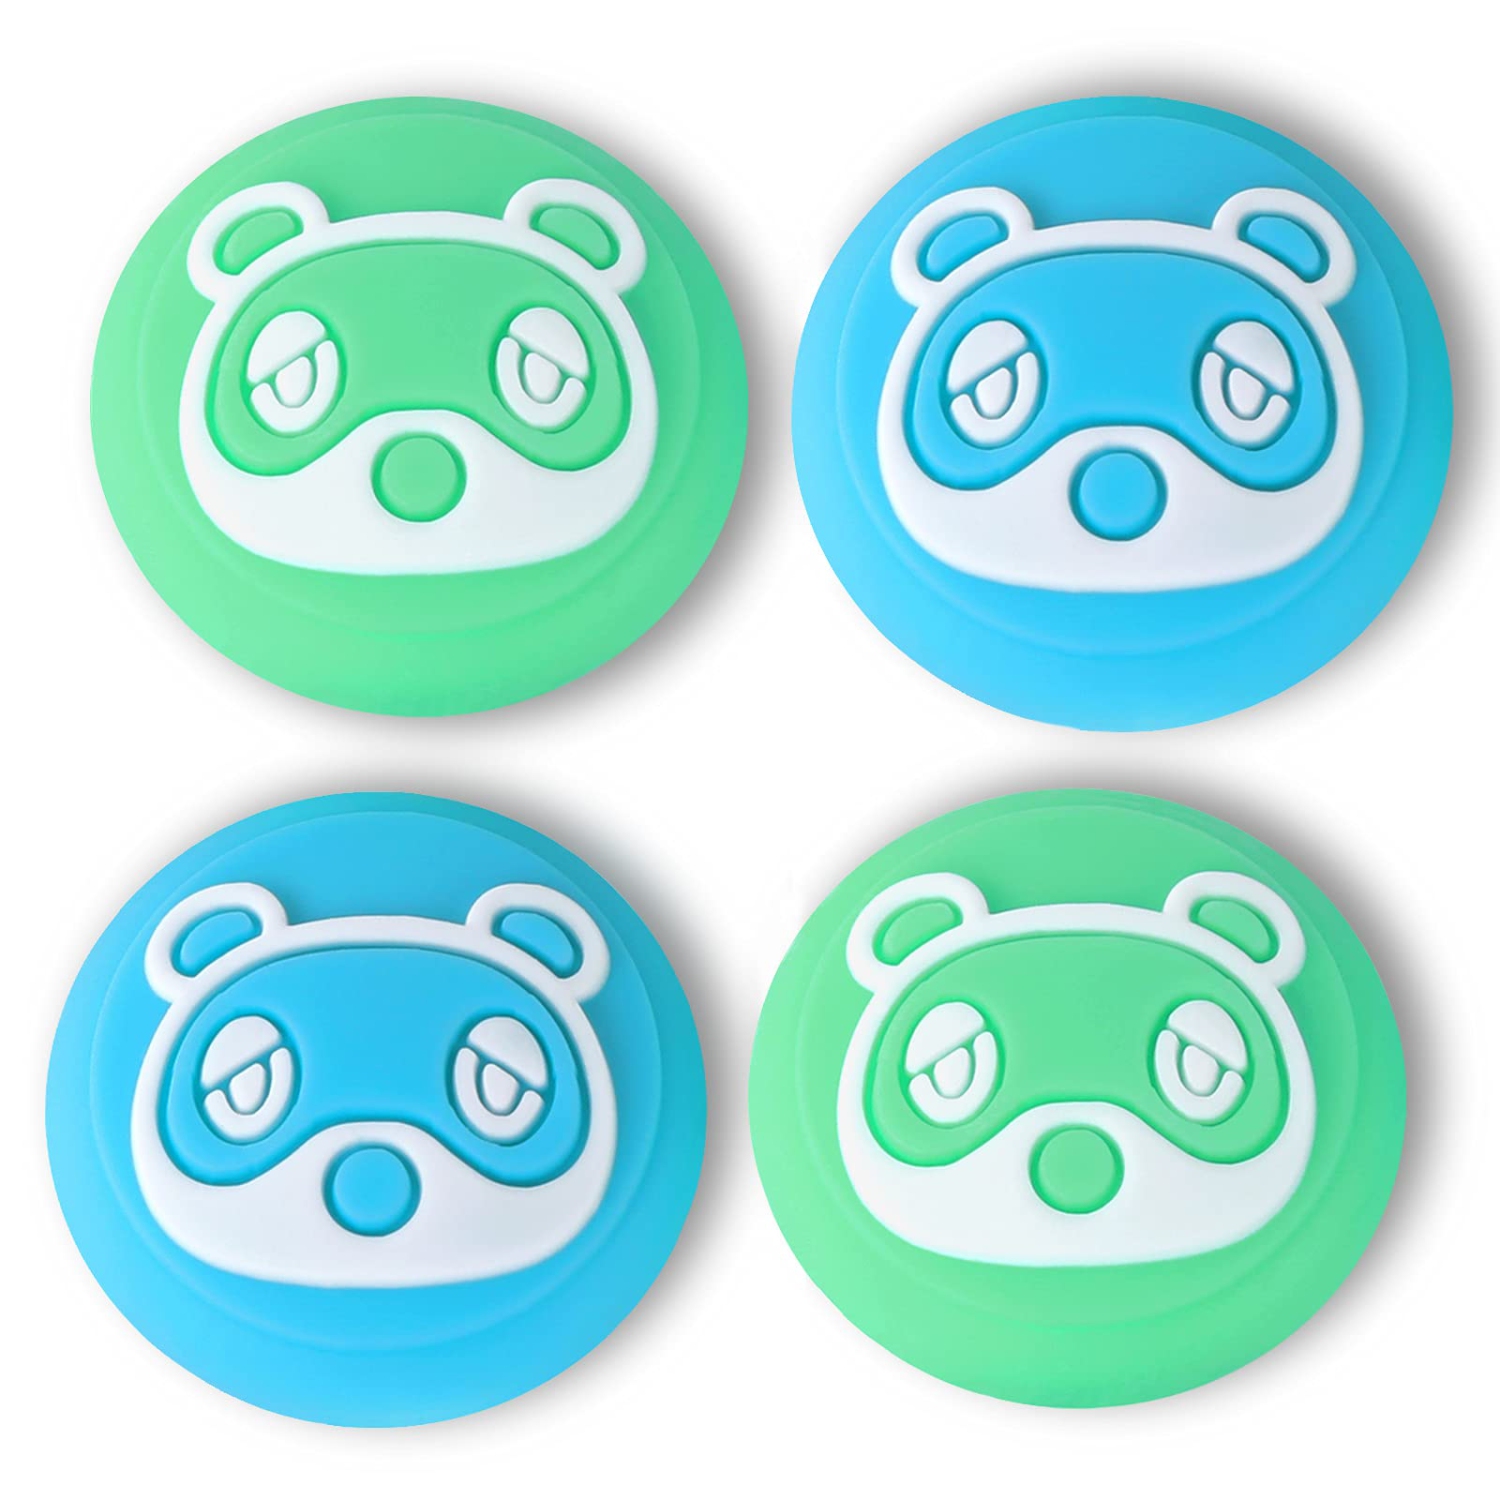 Boost your Nintendo Switch gaming with Animal Crossing Raccoon Thumb Grip Caps. Enhance control and protect Joy-Cons with our cute, soft silicone covers.